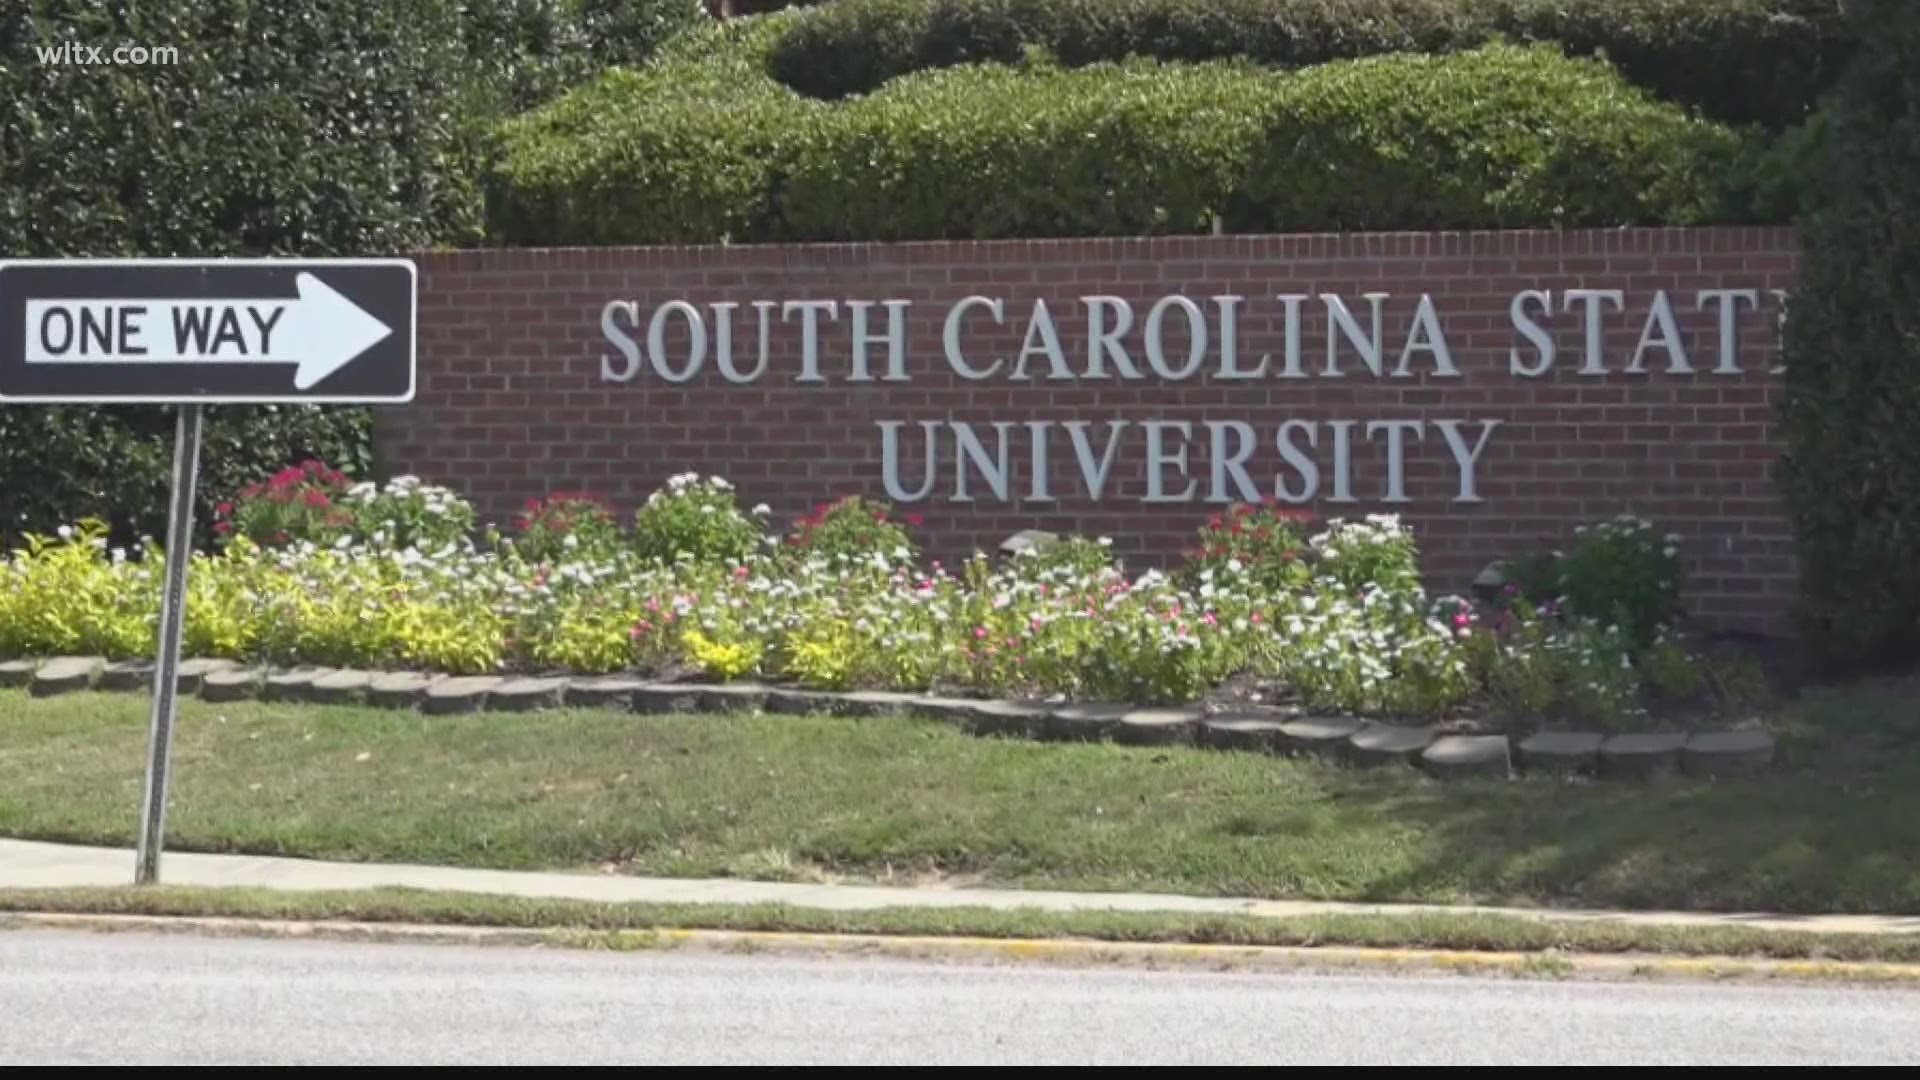 S.C. State University says it has suspended athletic practices after an athletics staff member tested positive for COVID-19.